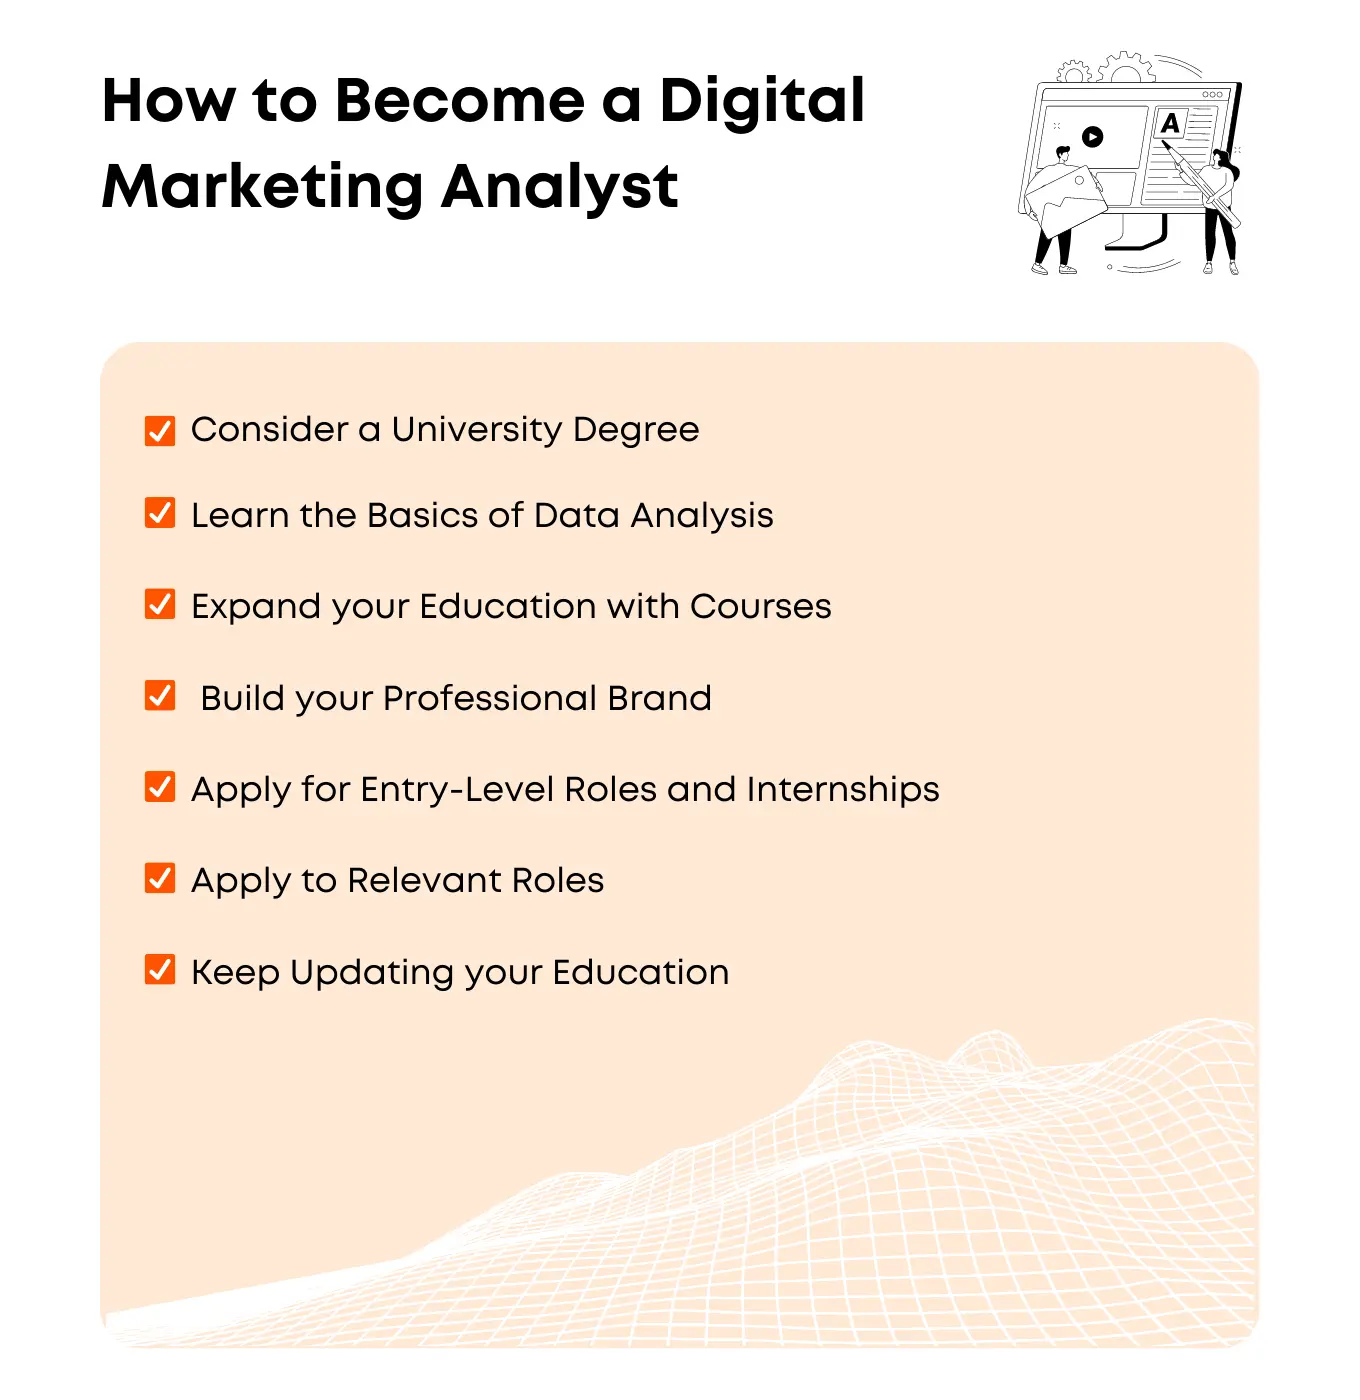 How to Become a Digital Marketing Analyst